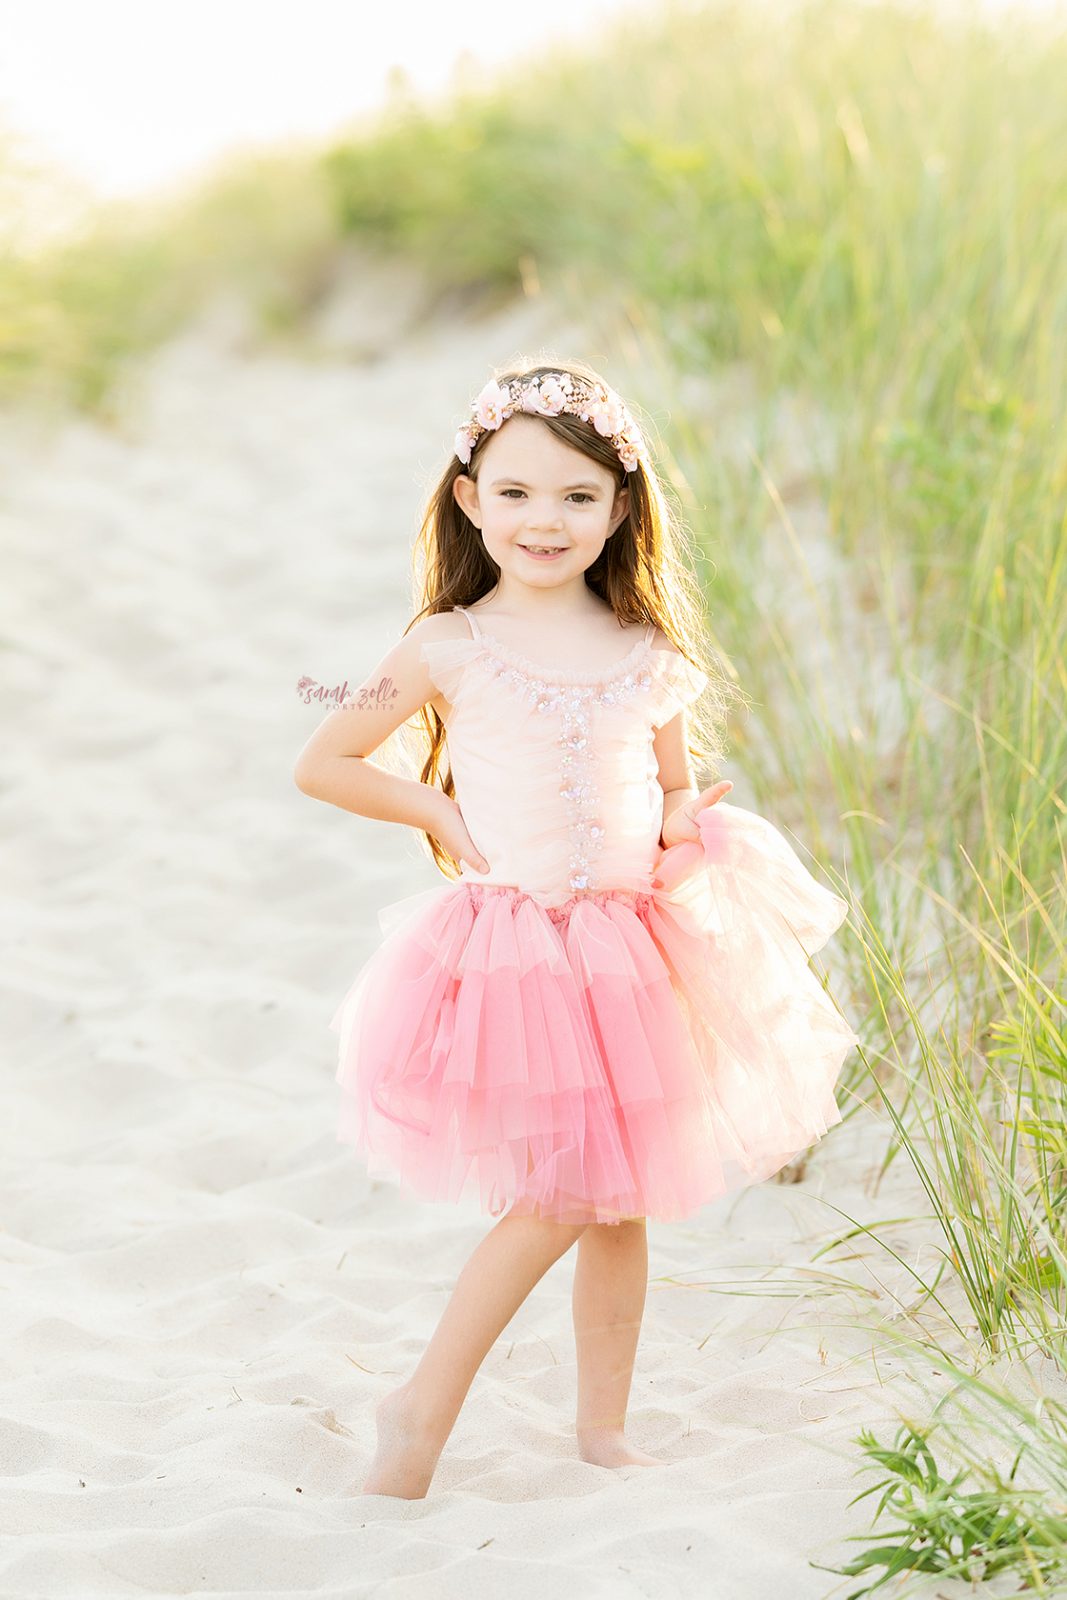 Beach Photo Session Watch Hill, Napatree Point, Westerly, RI - girl walking posing in tutu in sand